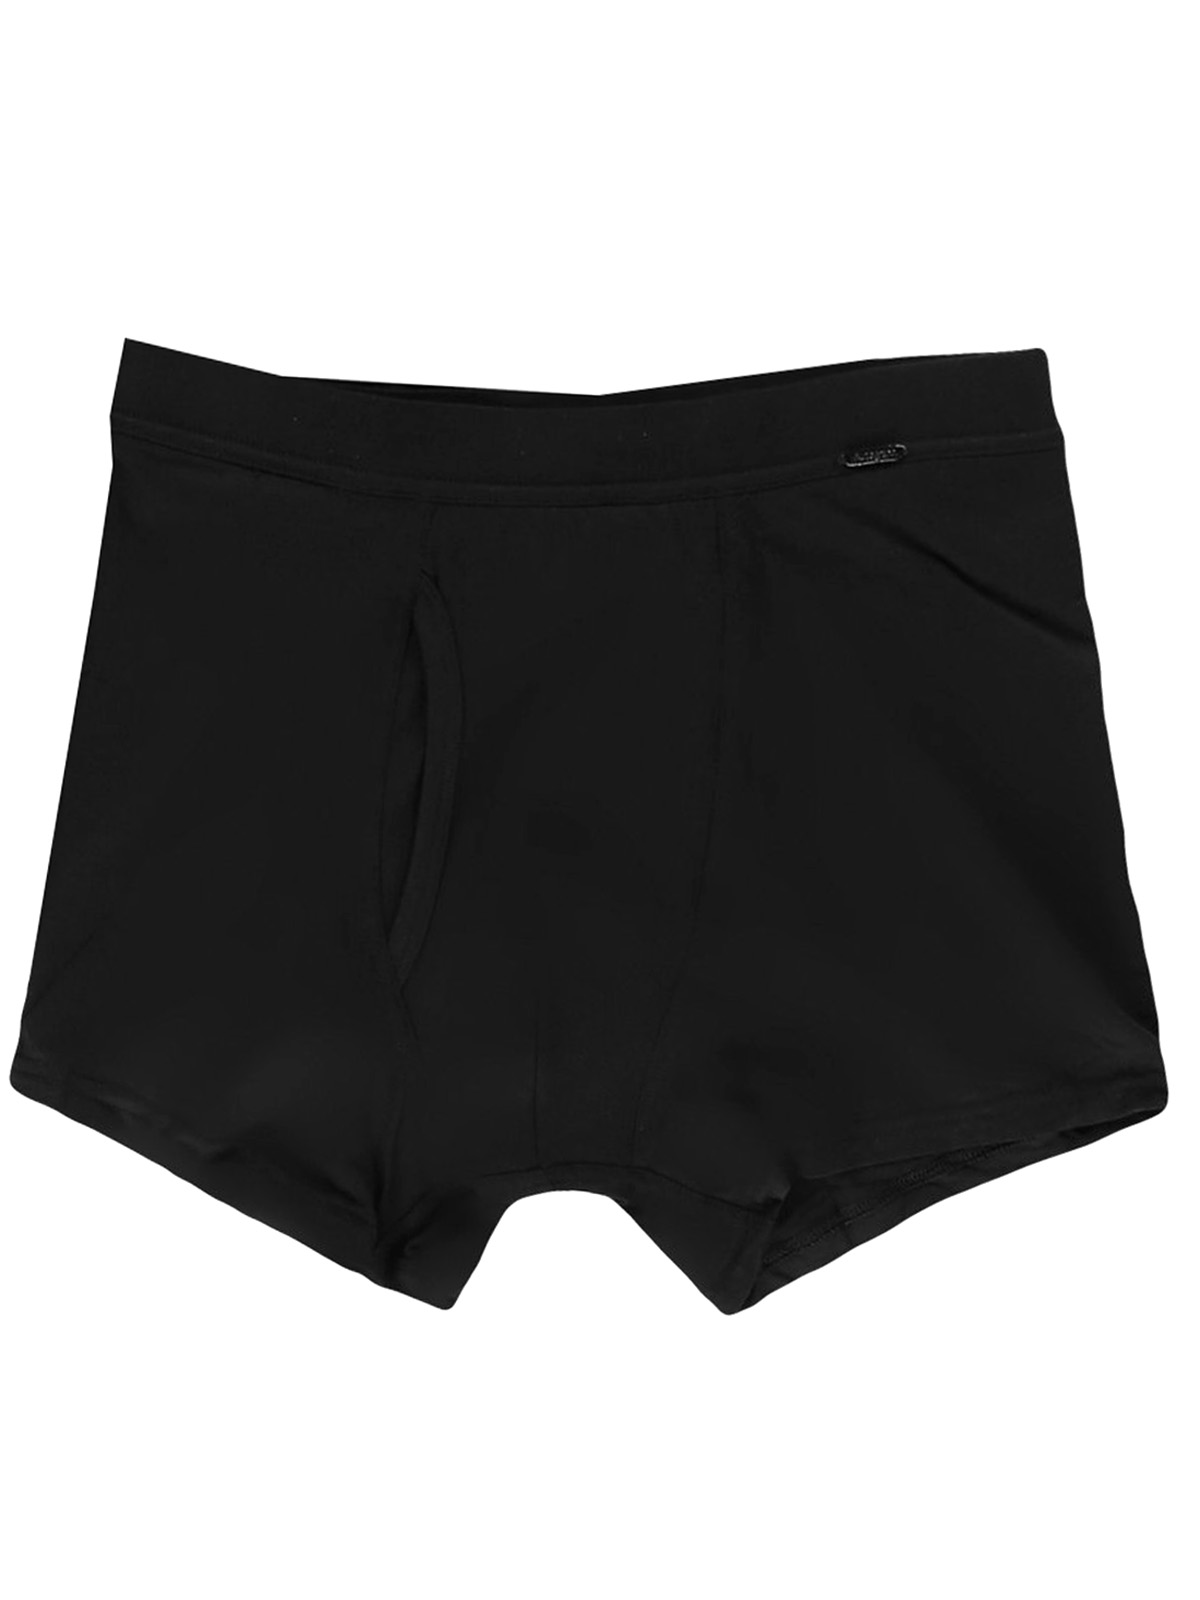 Marks and Spencer - - M&5 ASSORTED Mens Boxers - Size Small to Large